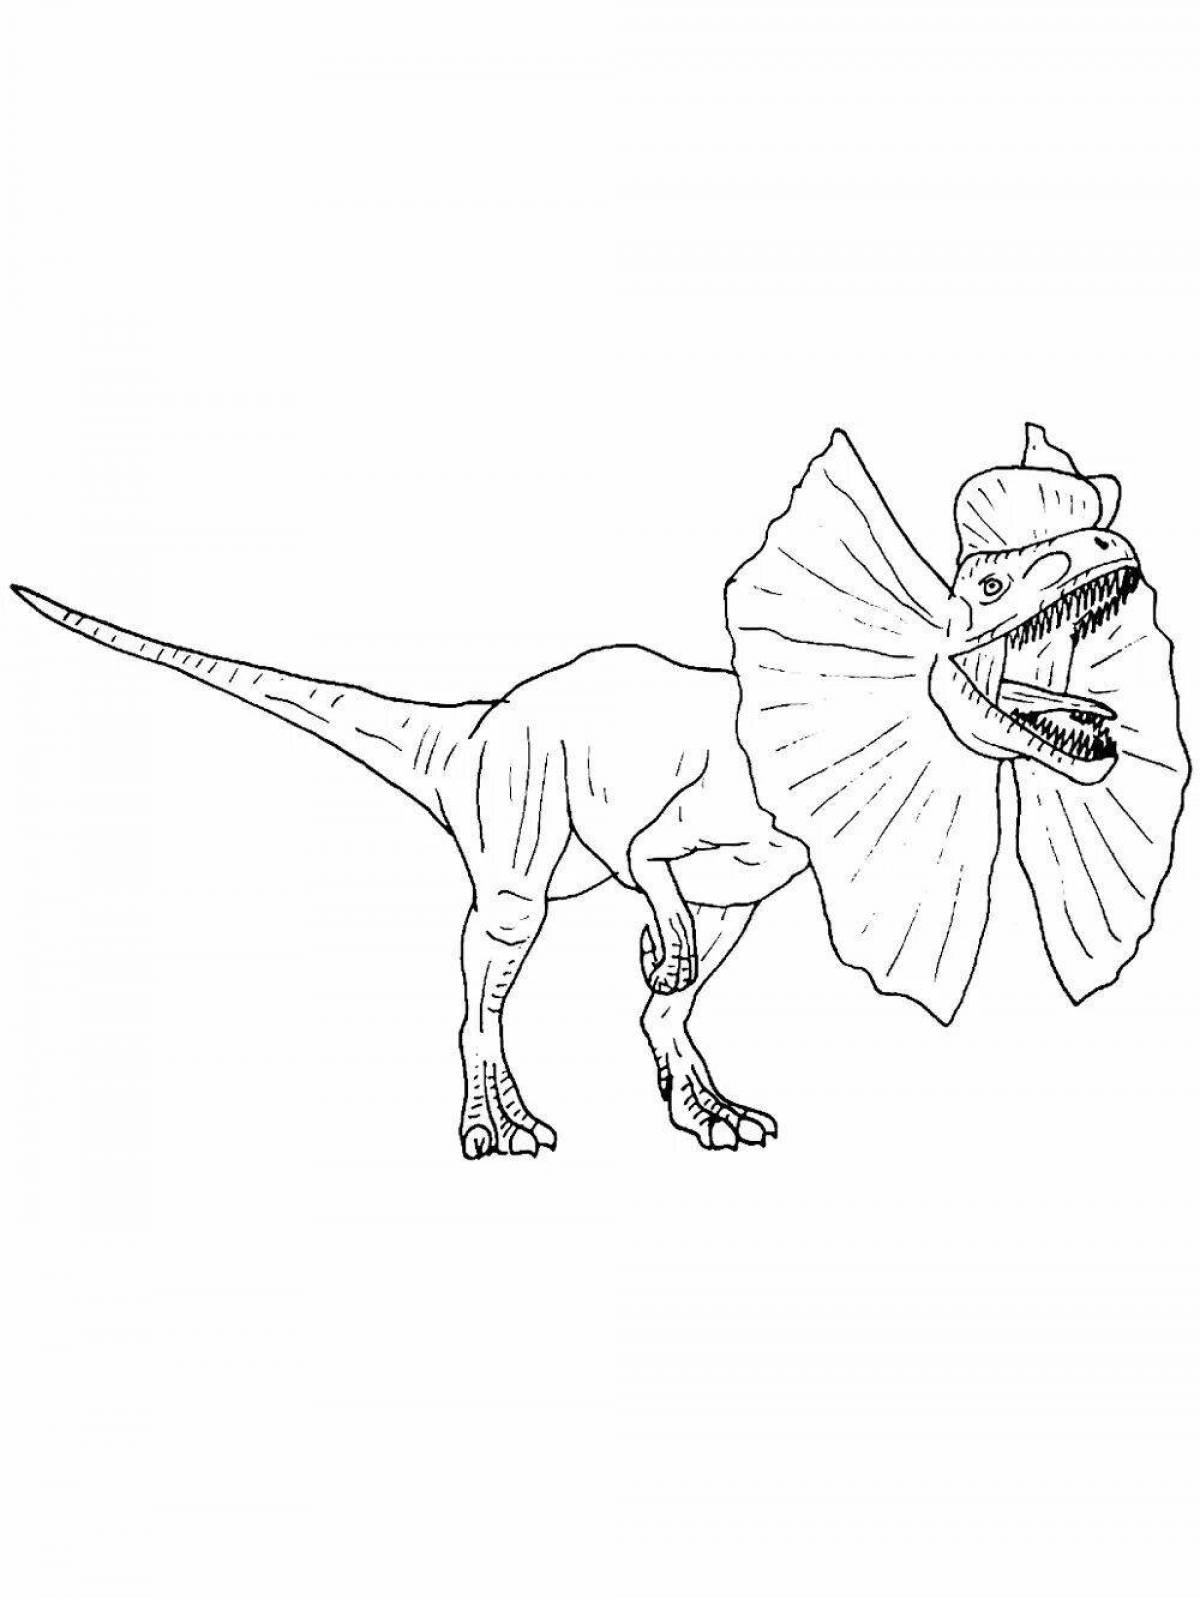 Mysterious dilophosaurus coloring page